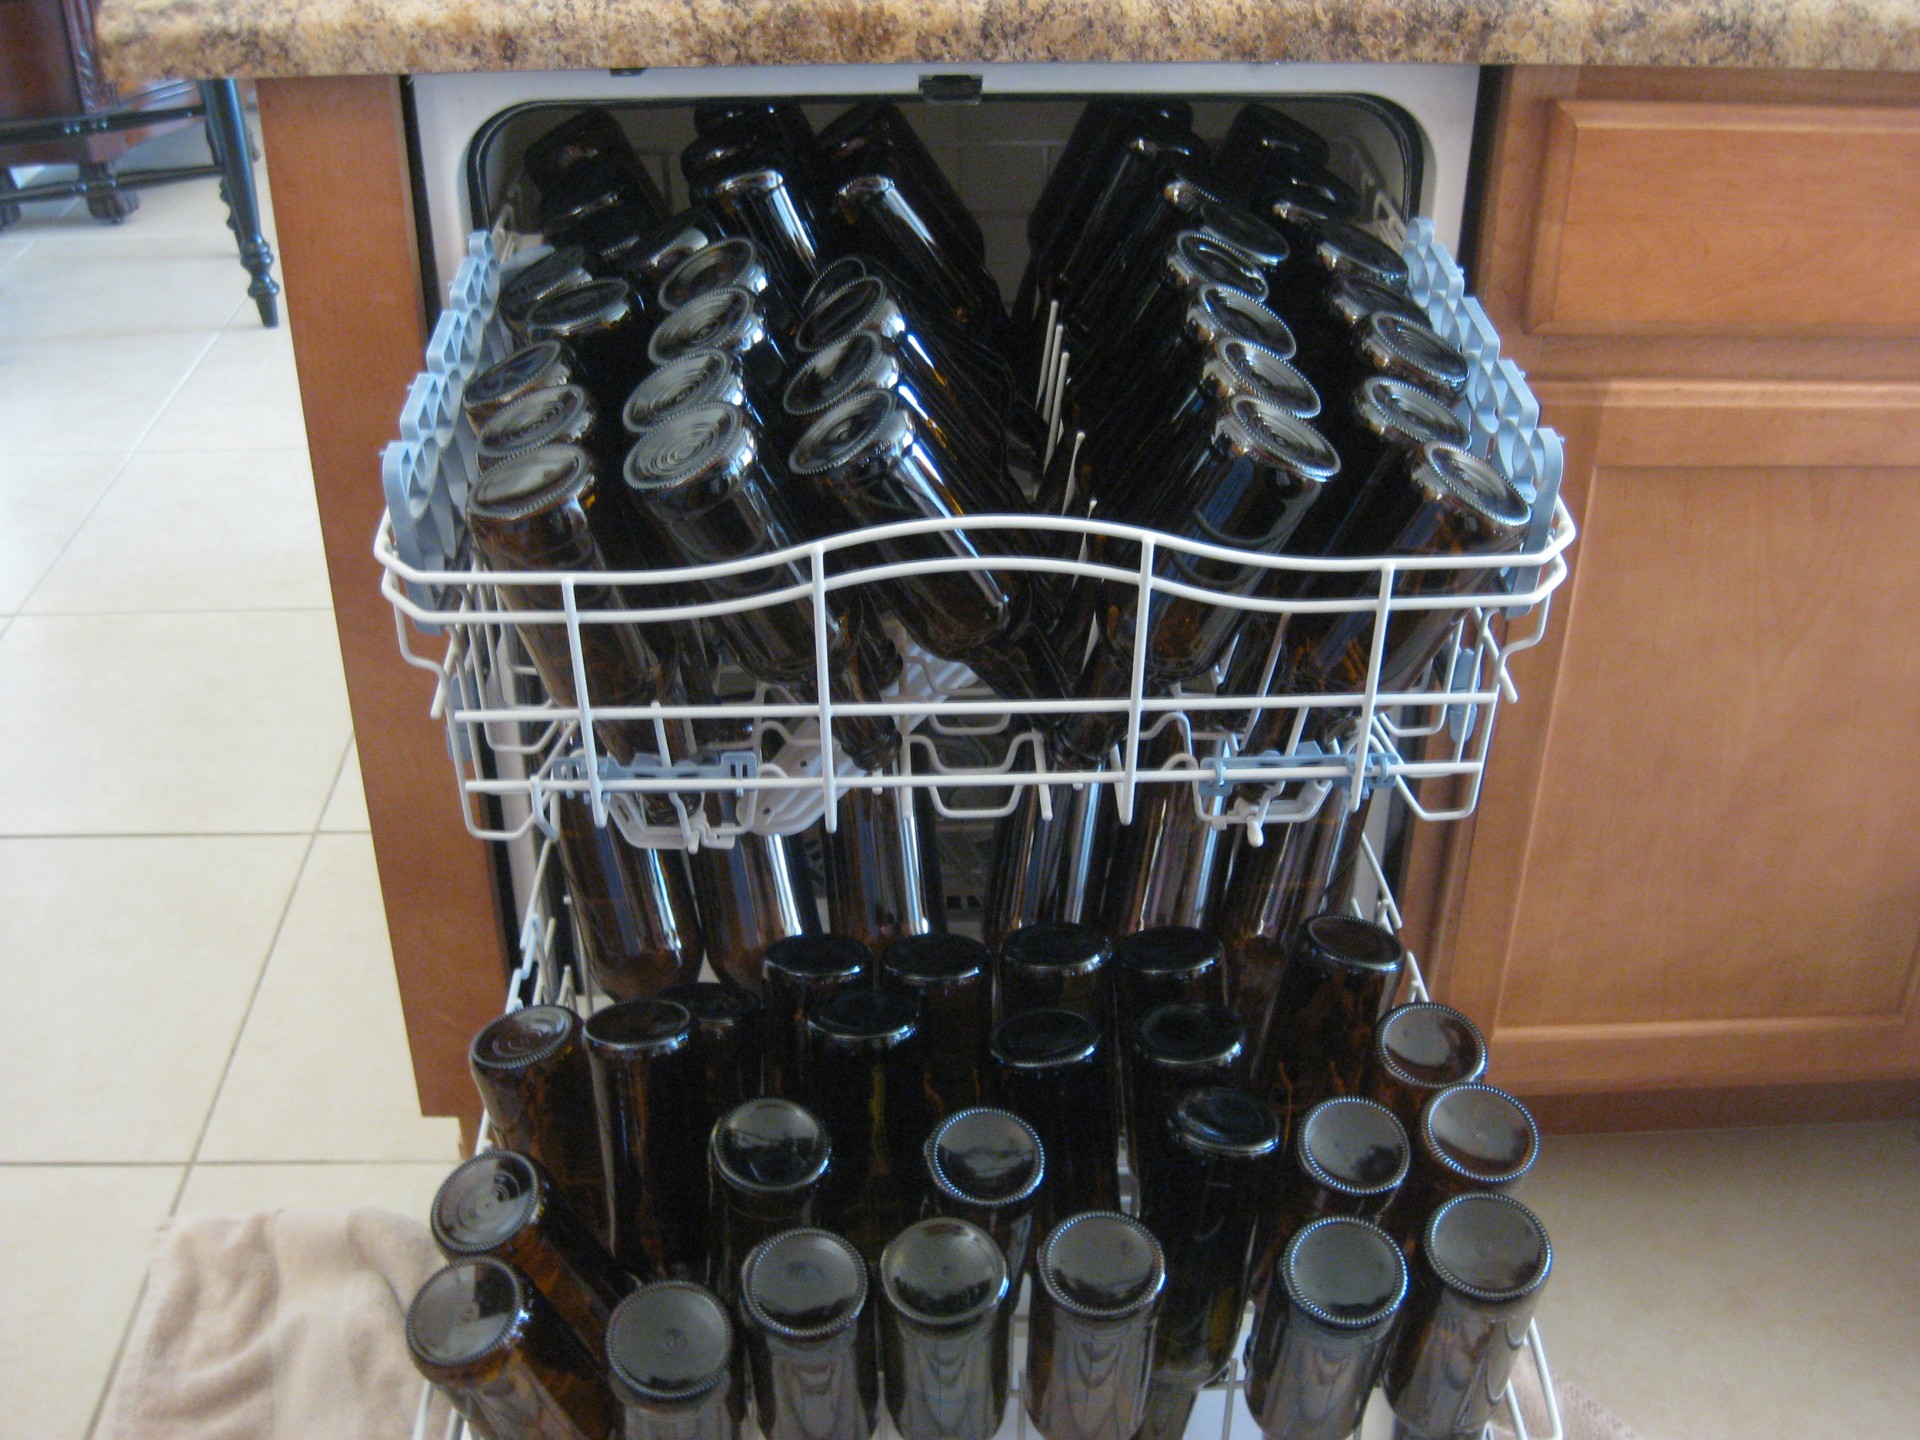 Cleaning Bottles in the Dishwasher Archives - Beer Syndicate Blog